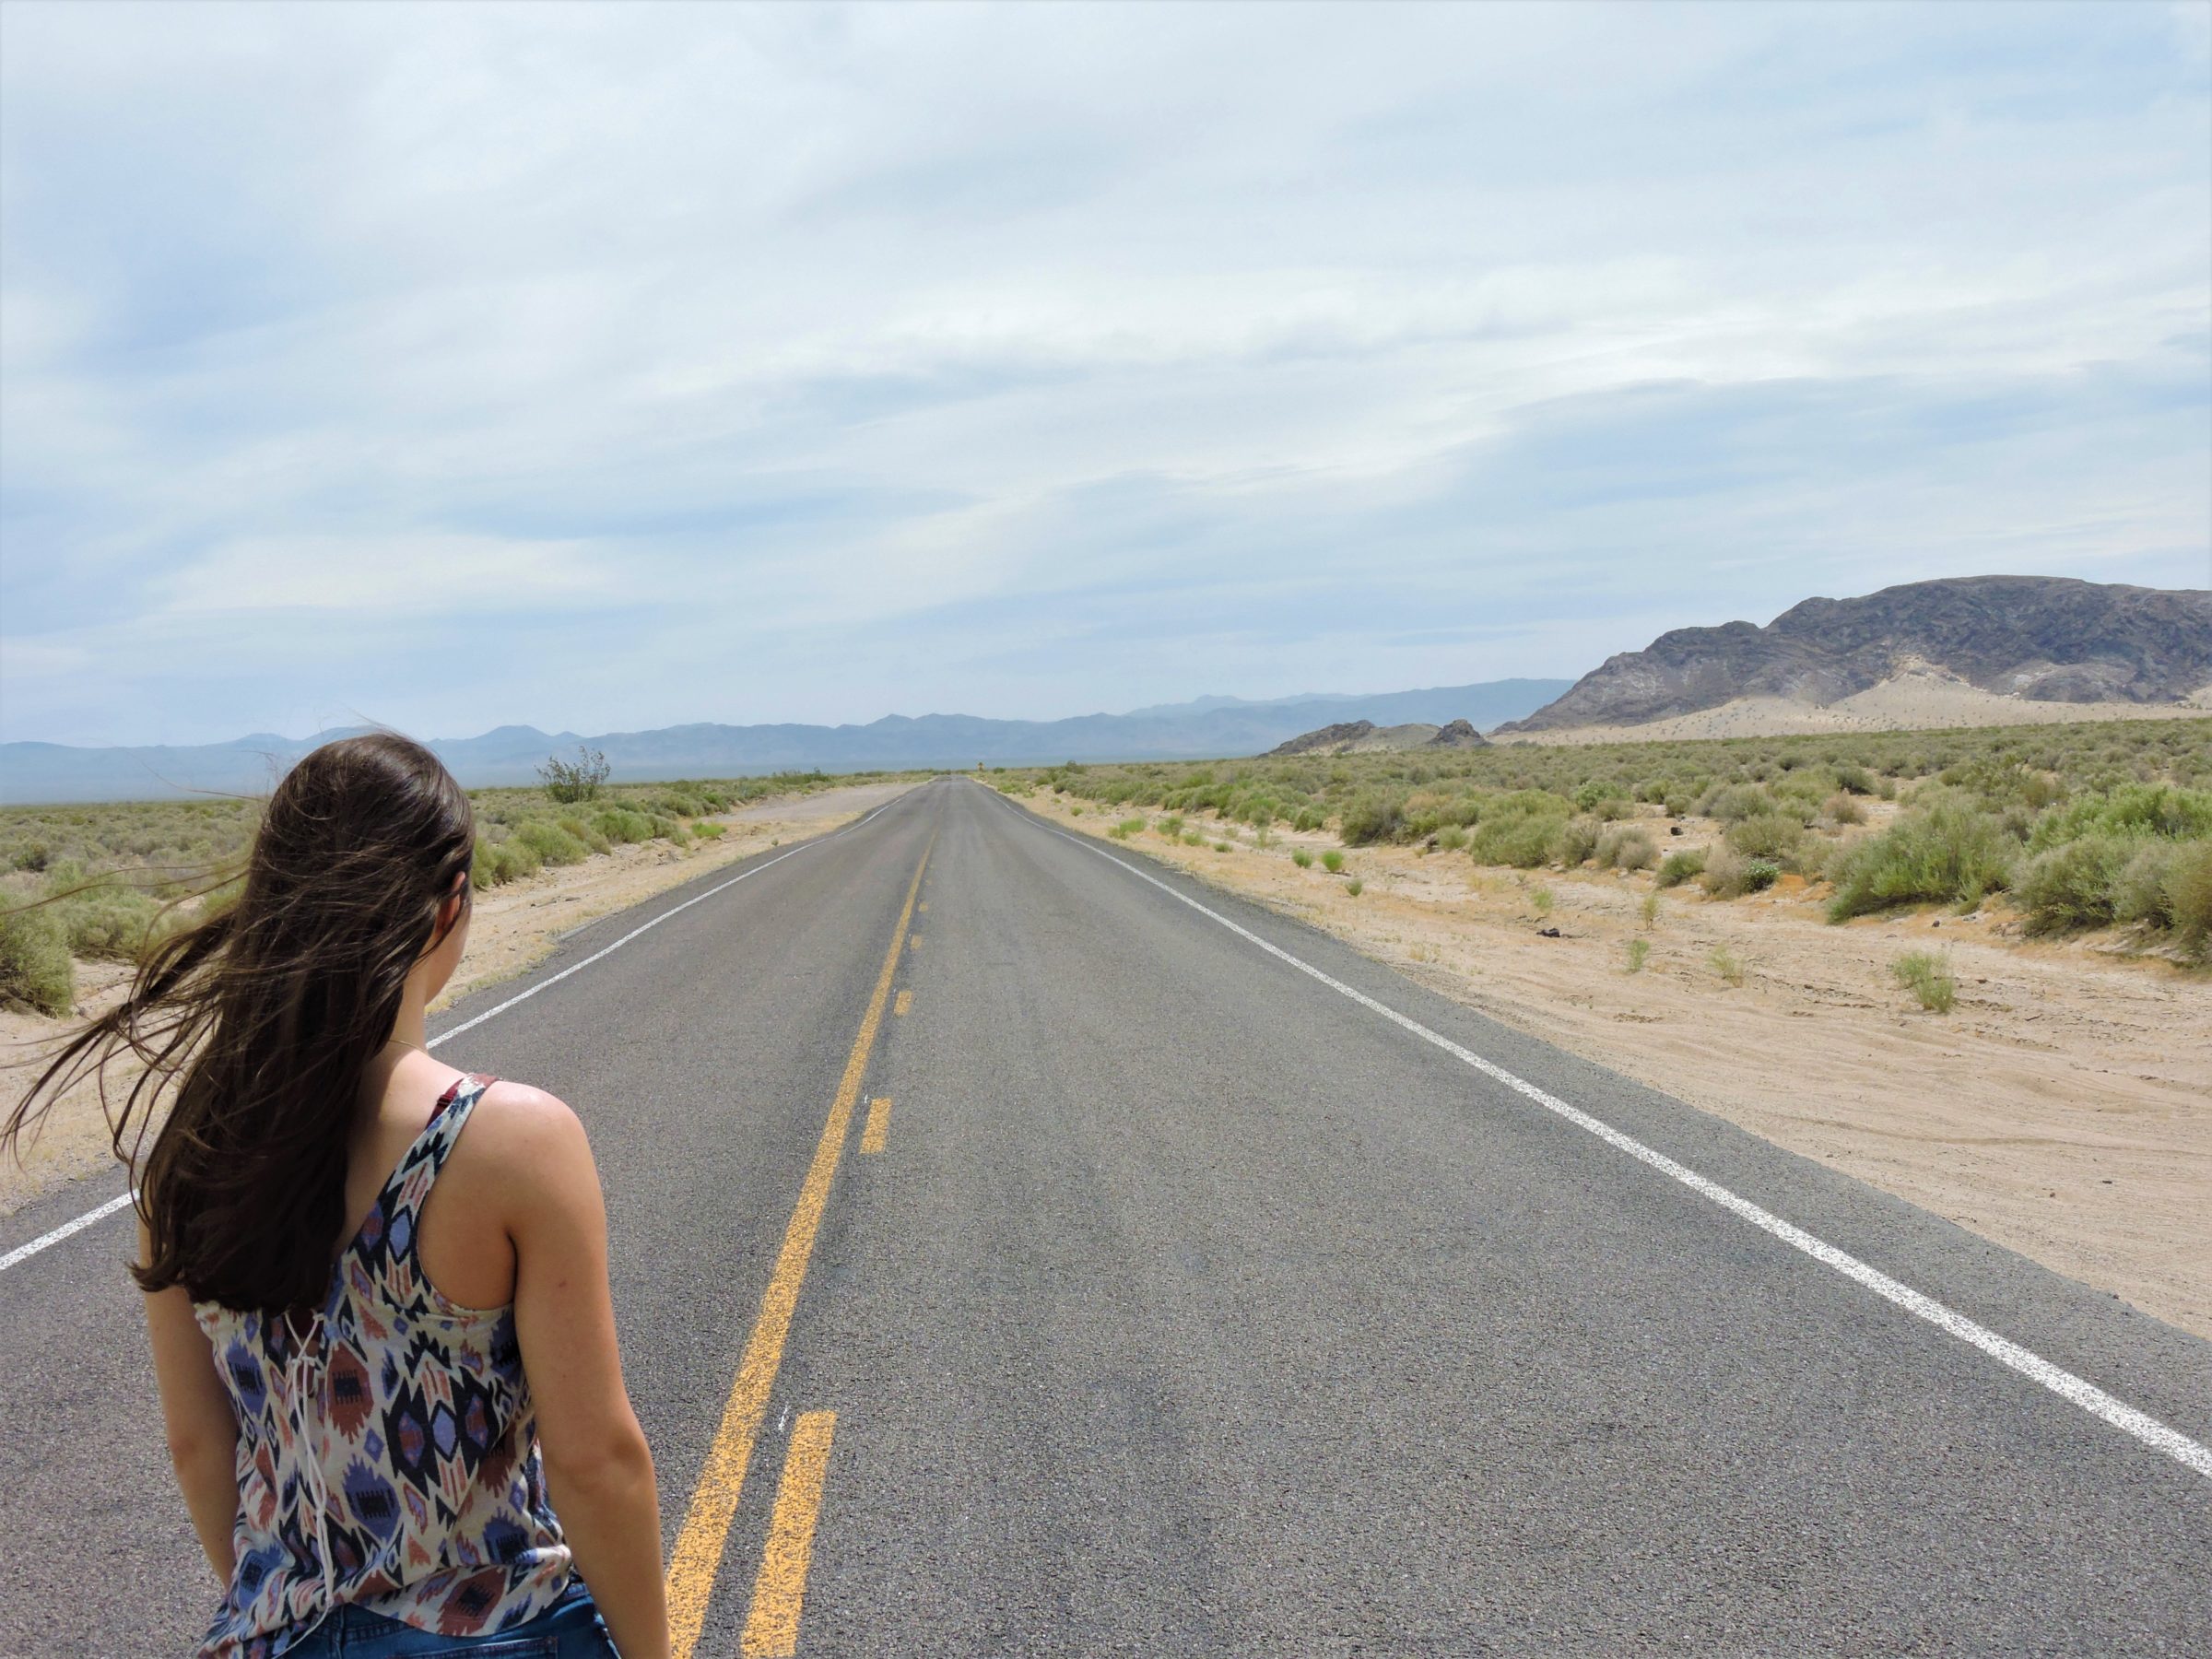 Standing on the Road in Mojave National Preserve